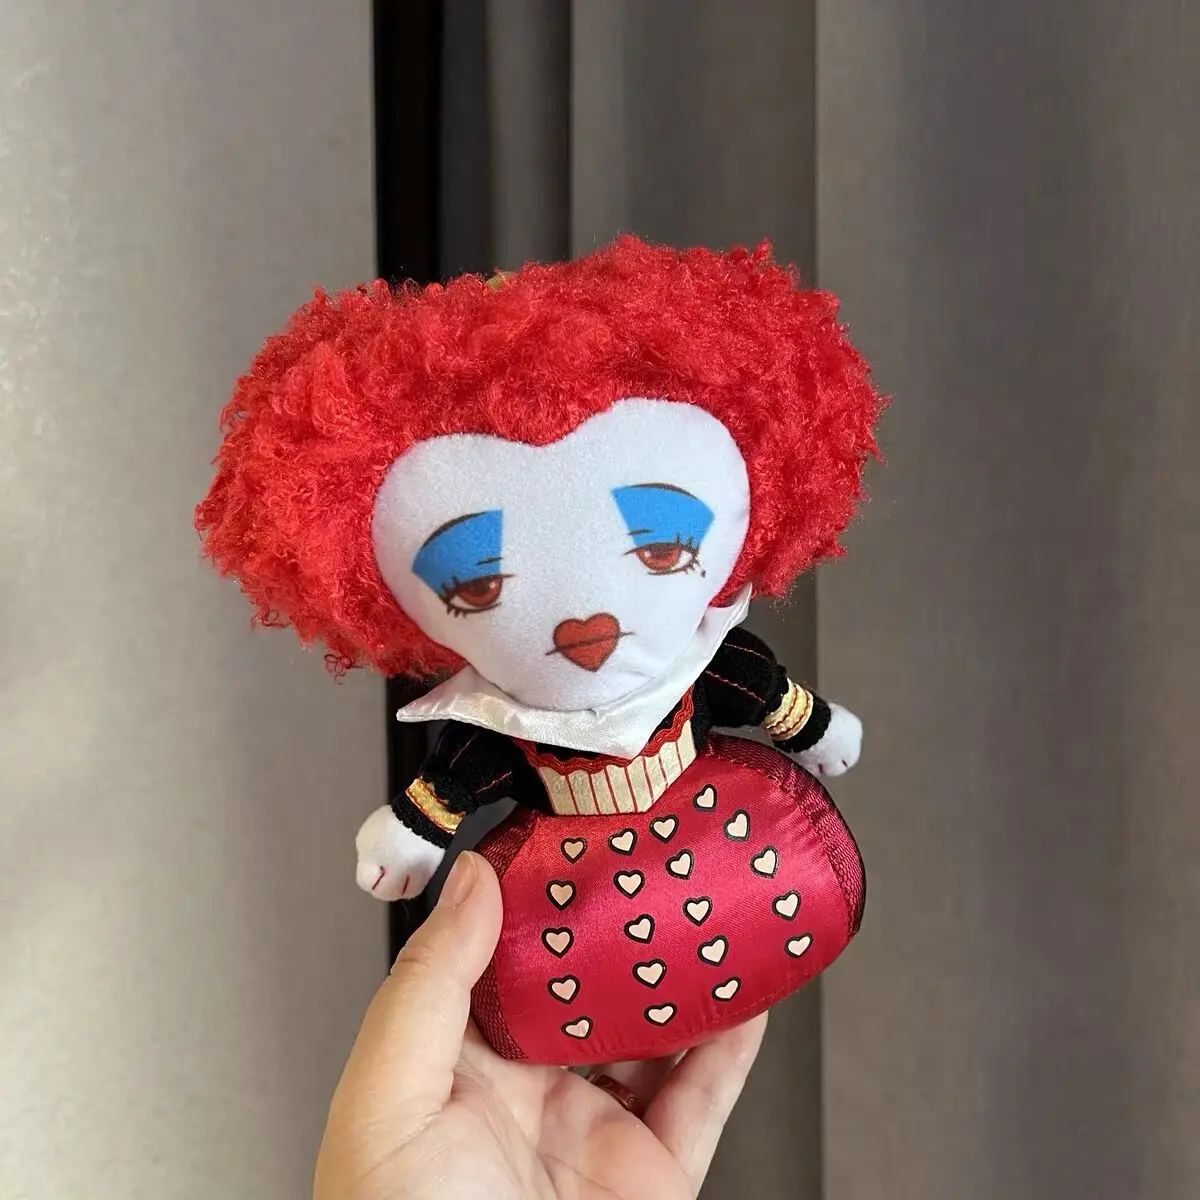 

Disney Alice in Wonderland Mad Hatter Cheshire Cat rabbit Red Queen Soft Stuffed Cotton Dolls Plush Peluche Toy For Kids Gifts